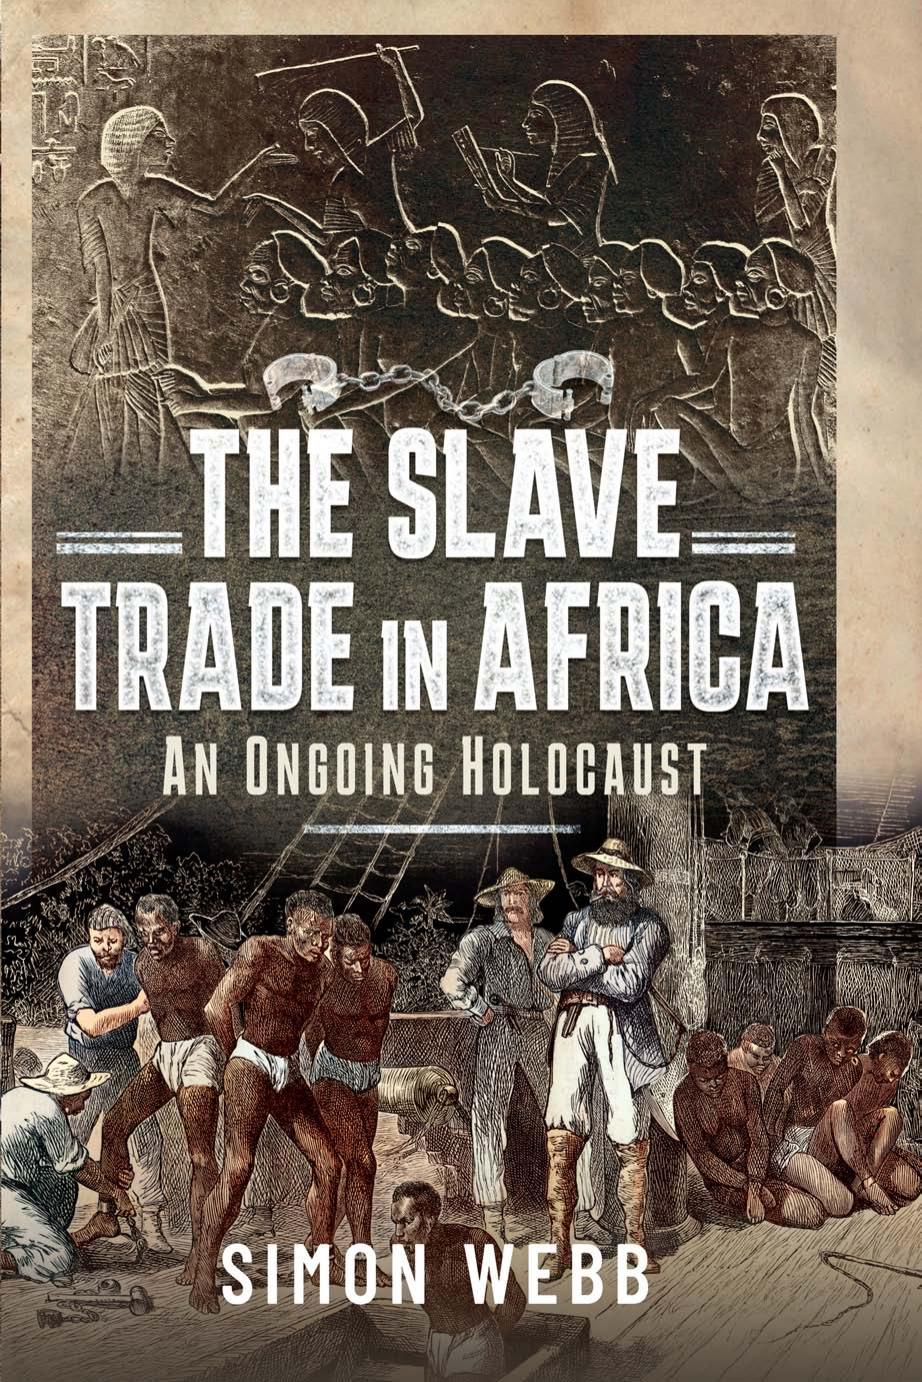 The Slave Trade in Africa: An Ongoing Holocaust by Simon Webb